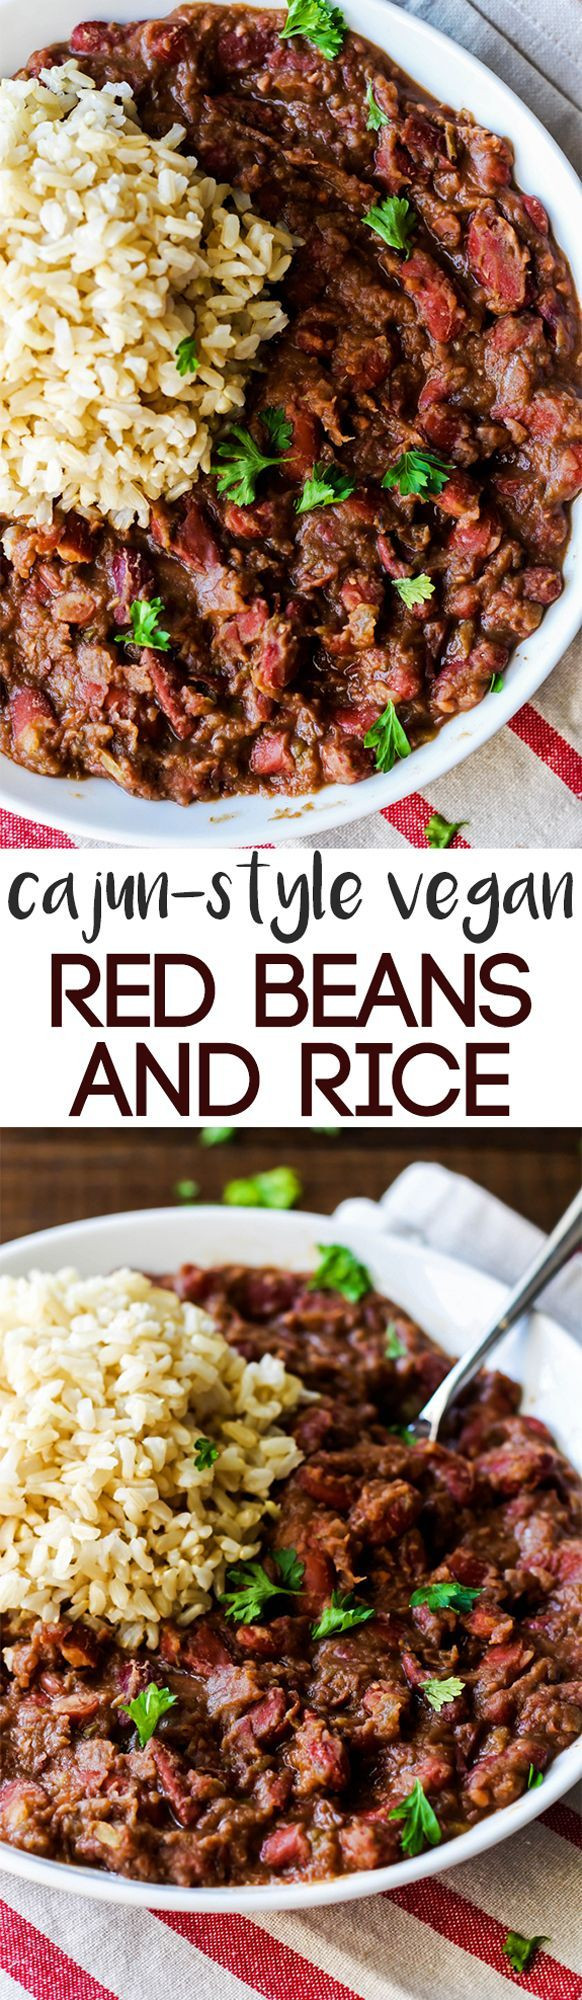 Healthy Red Beans And Rice
 These Cajun Style Vegan Red Beans and Rice are a healthy